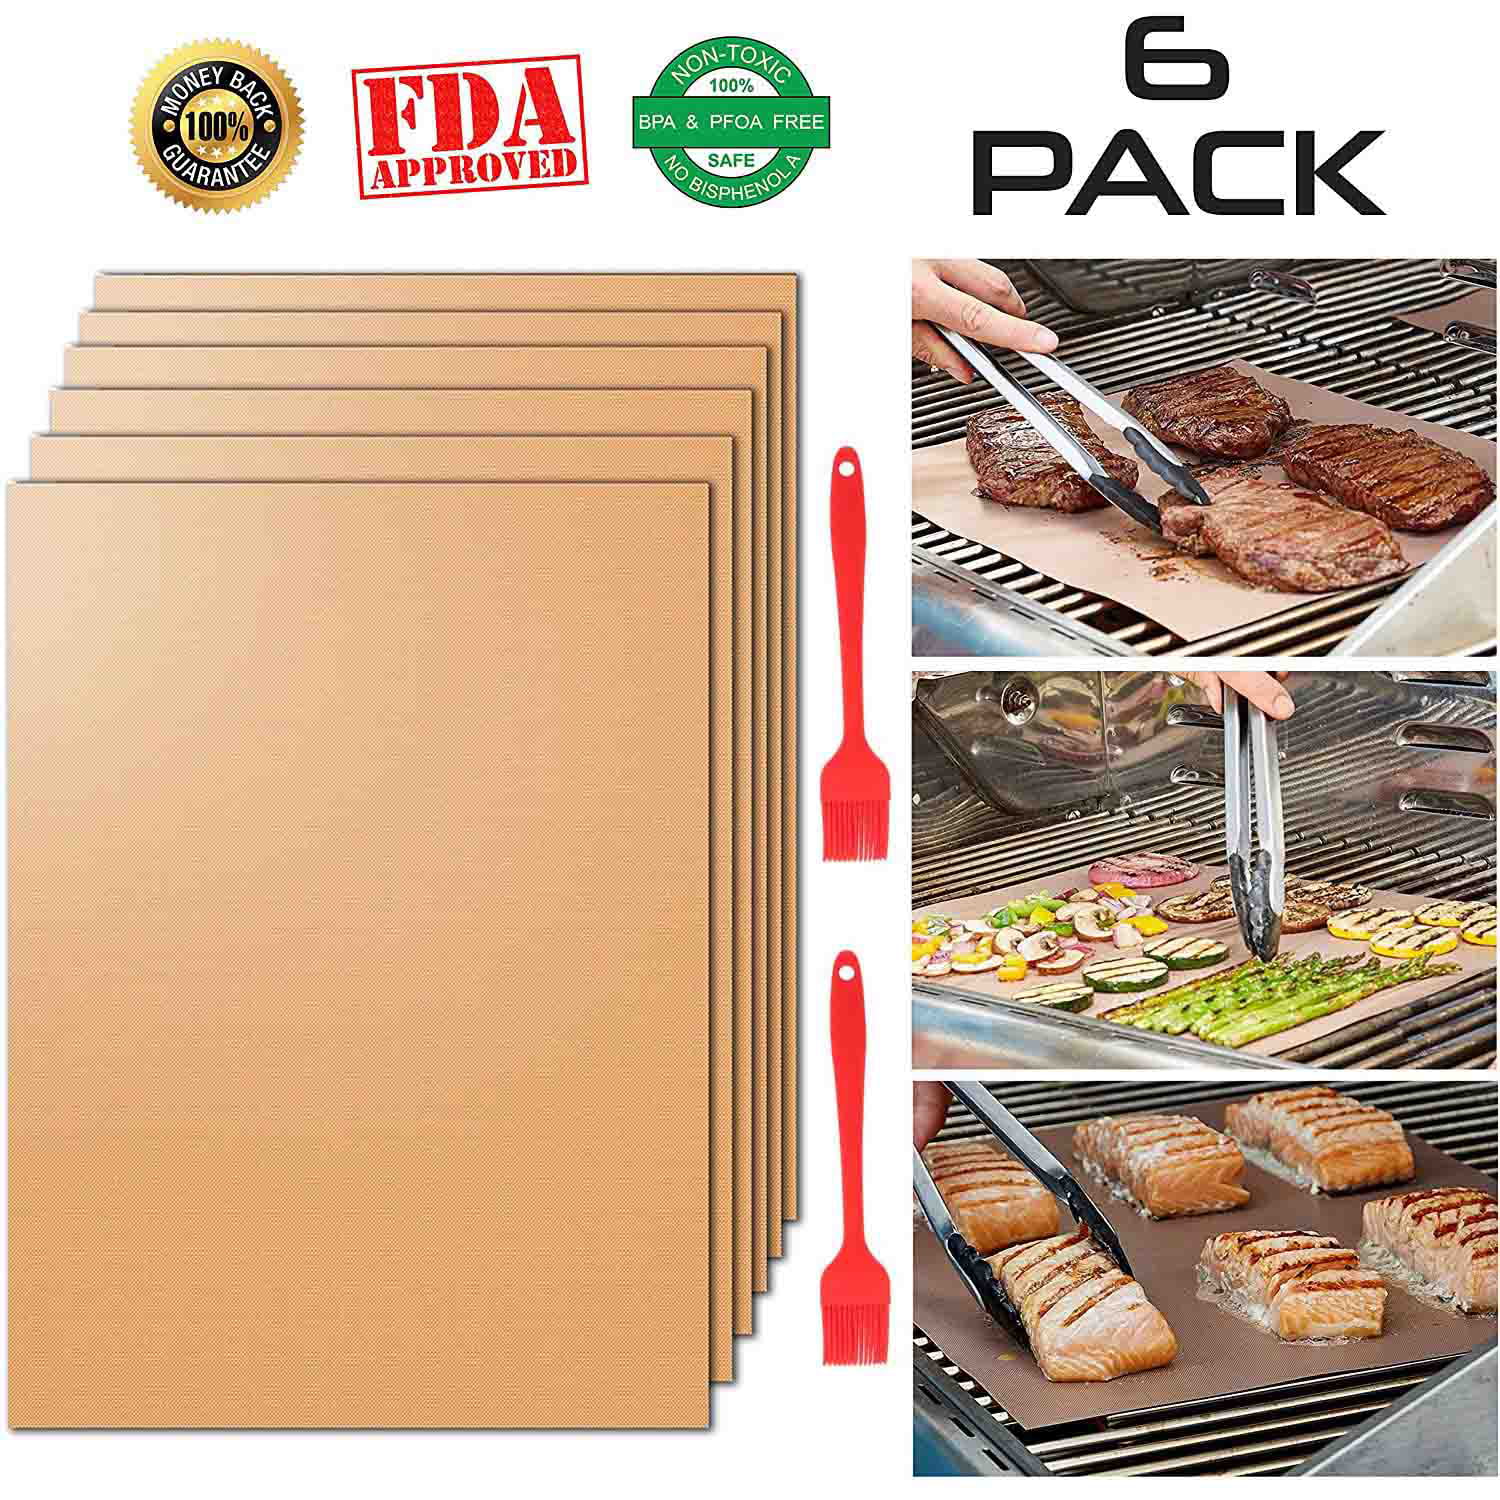 2Pcs Copper Chef Grill and Bake Mats BBQ Pad Tool Camping Hiking Home Outdoor